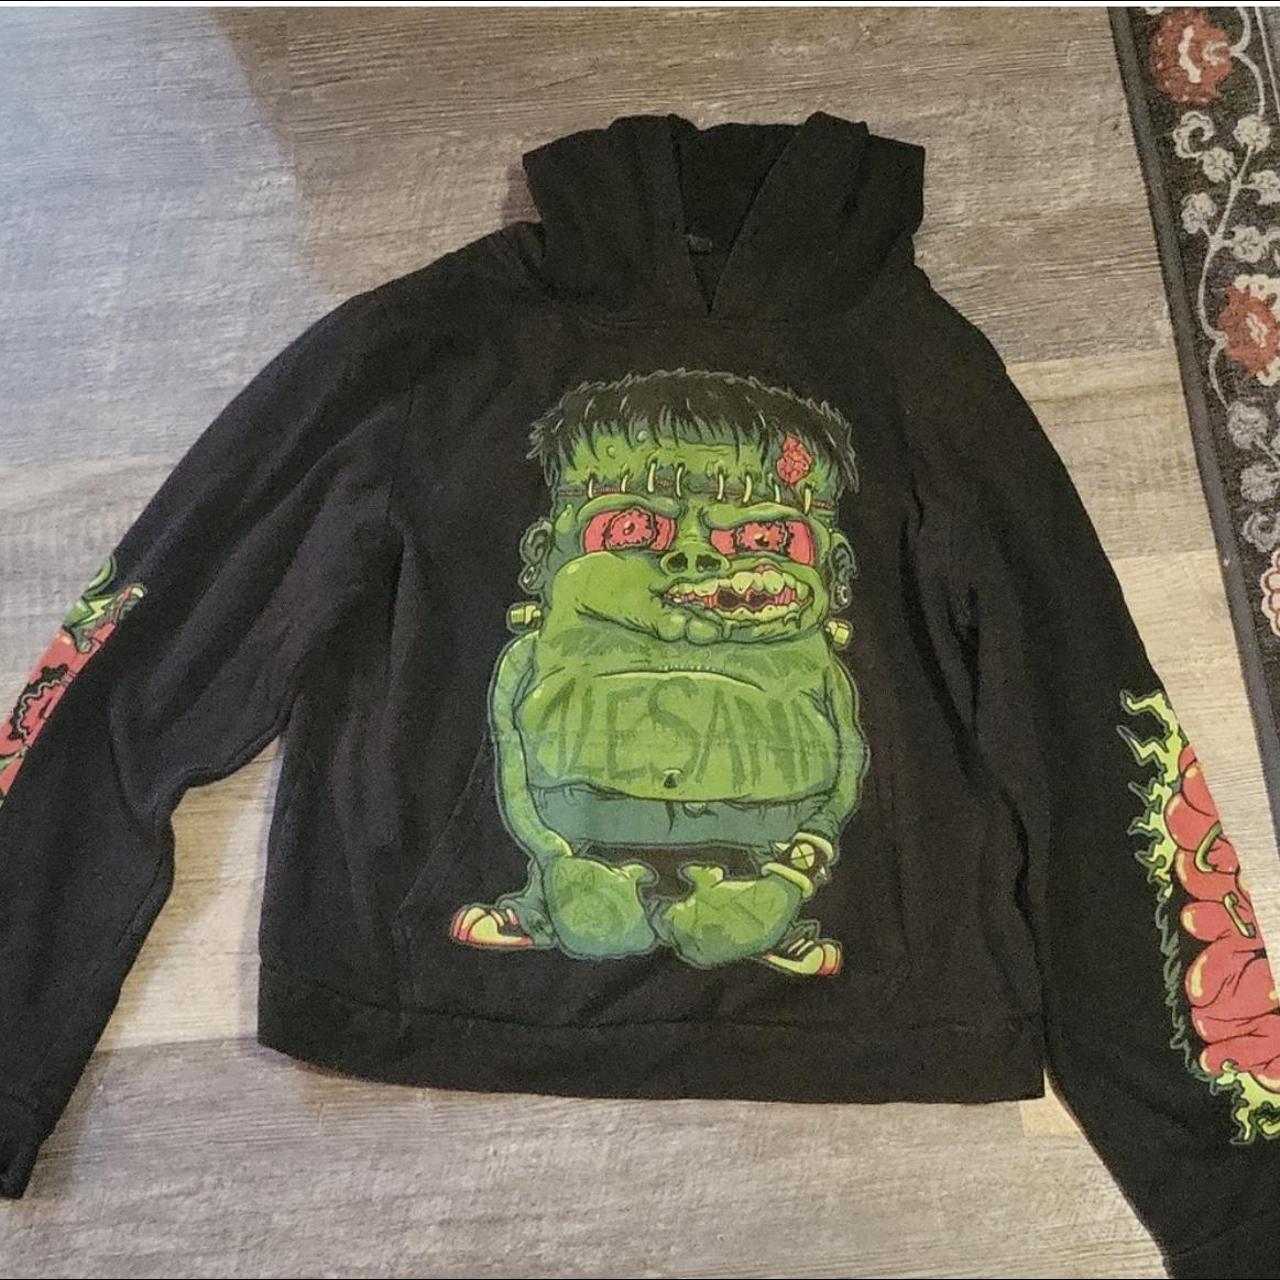 ‼️ISO POST‼️ As a collector of monster merch, I am... - Depop